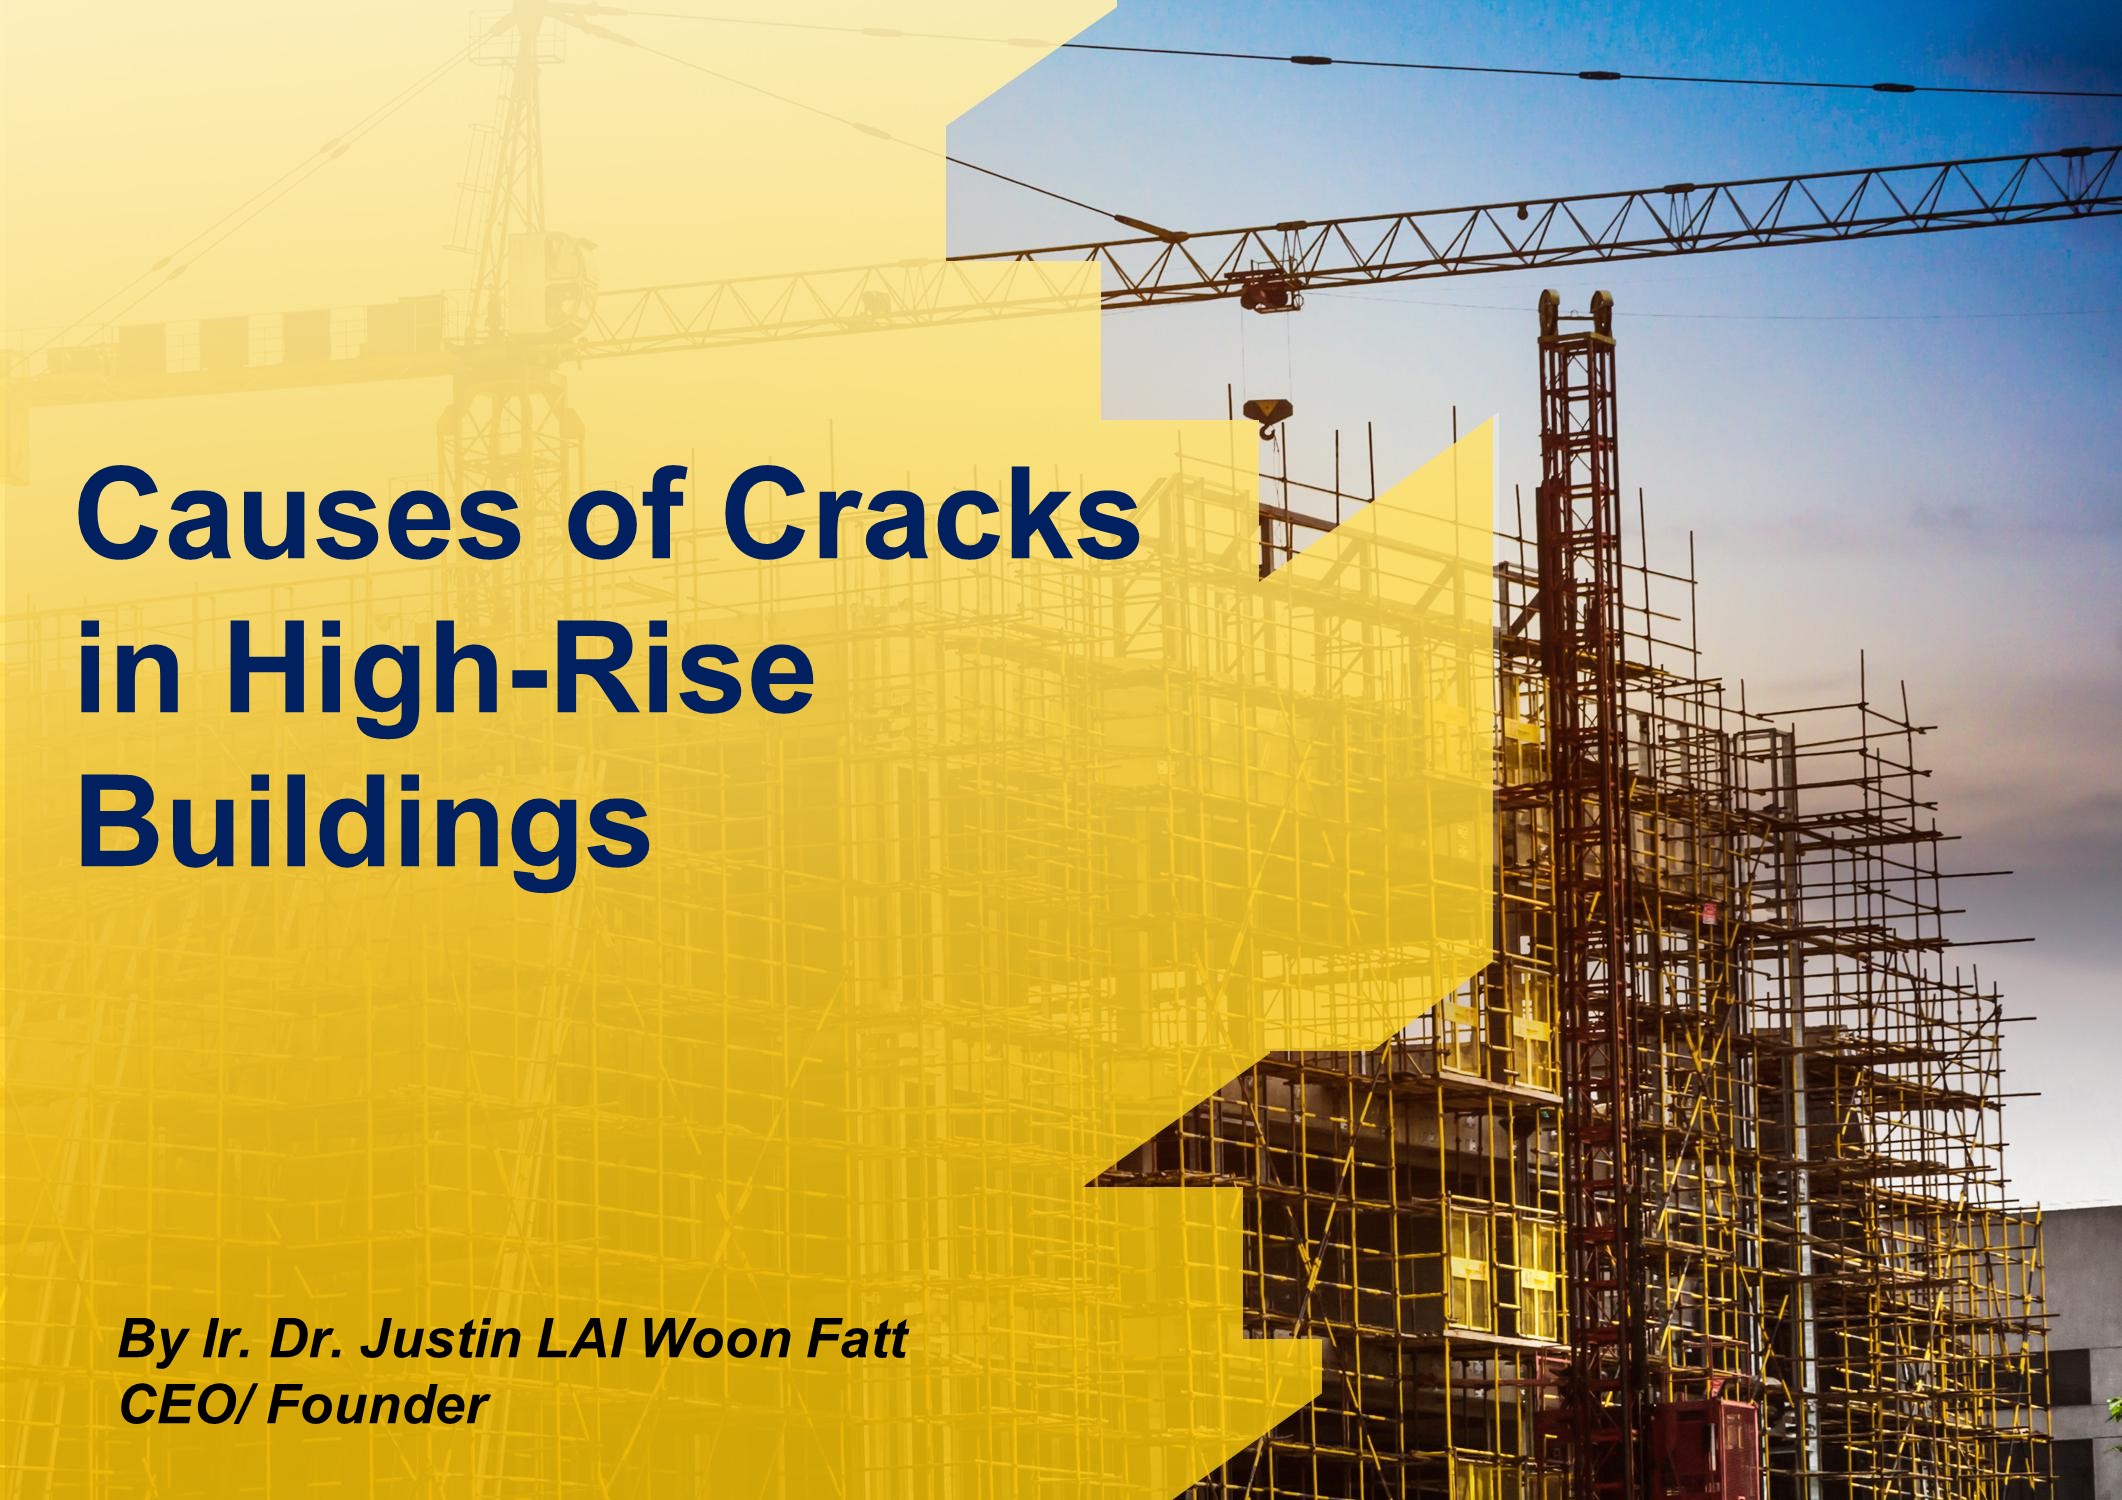 Causes of Cracks in High-Rise Buildings